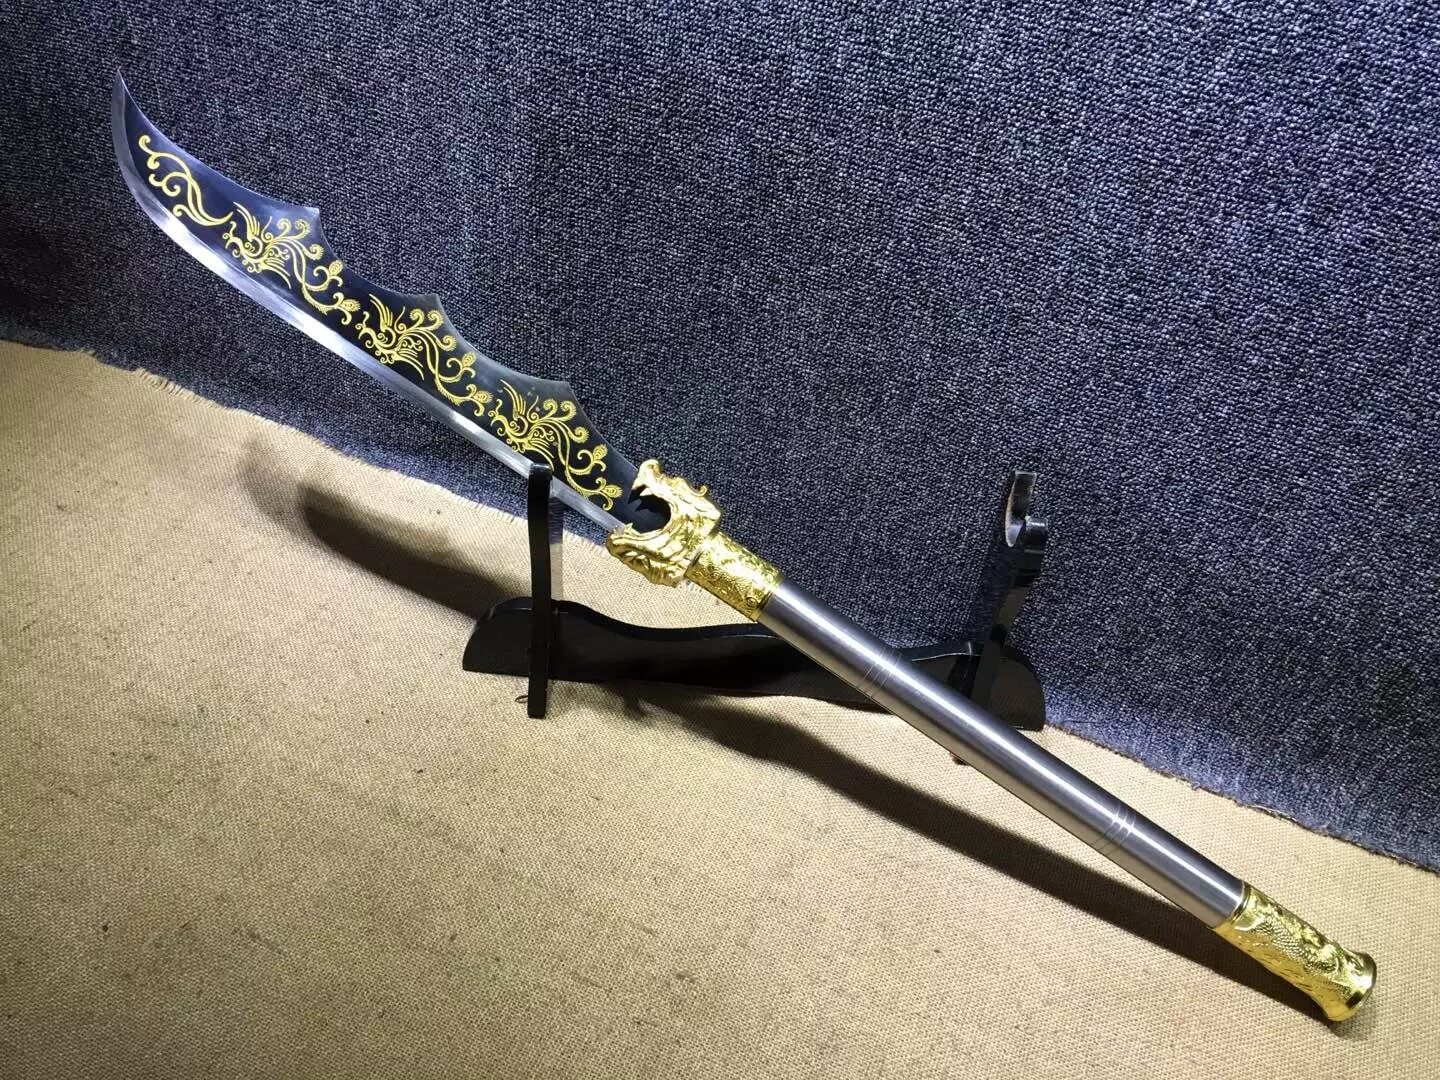 Peacock sword,High carbon steel,Leather scabbard,Alloy fitting,Length 35" - Chinese sword shop